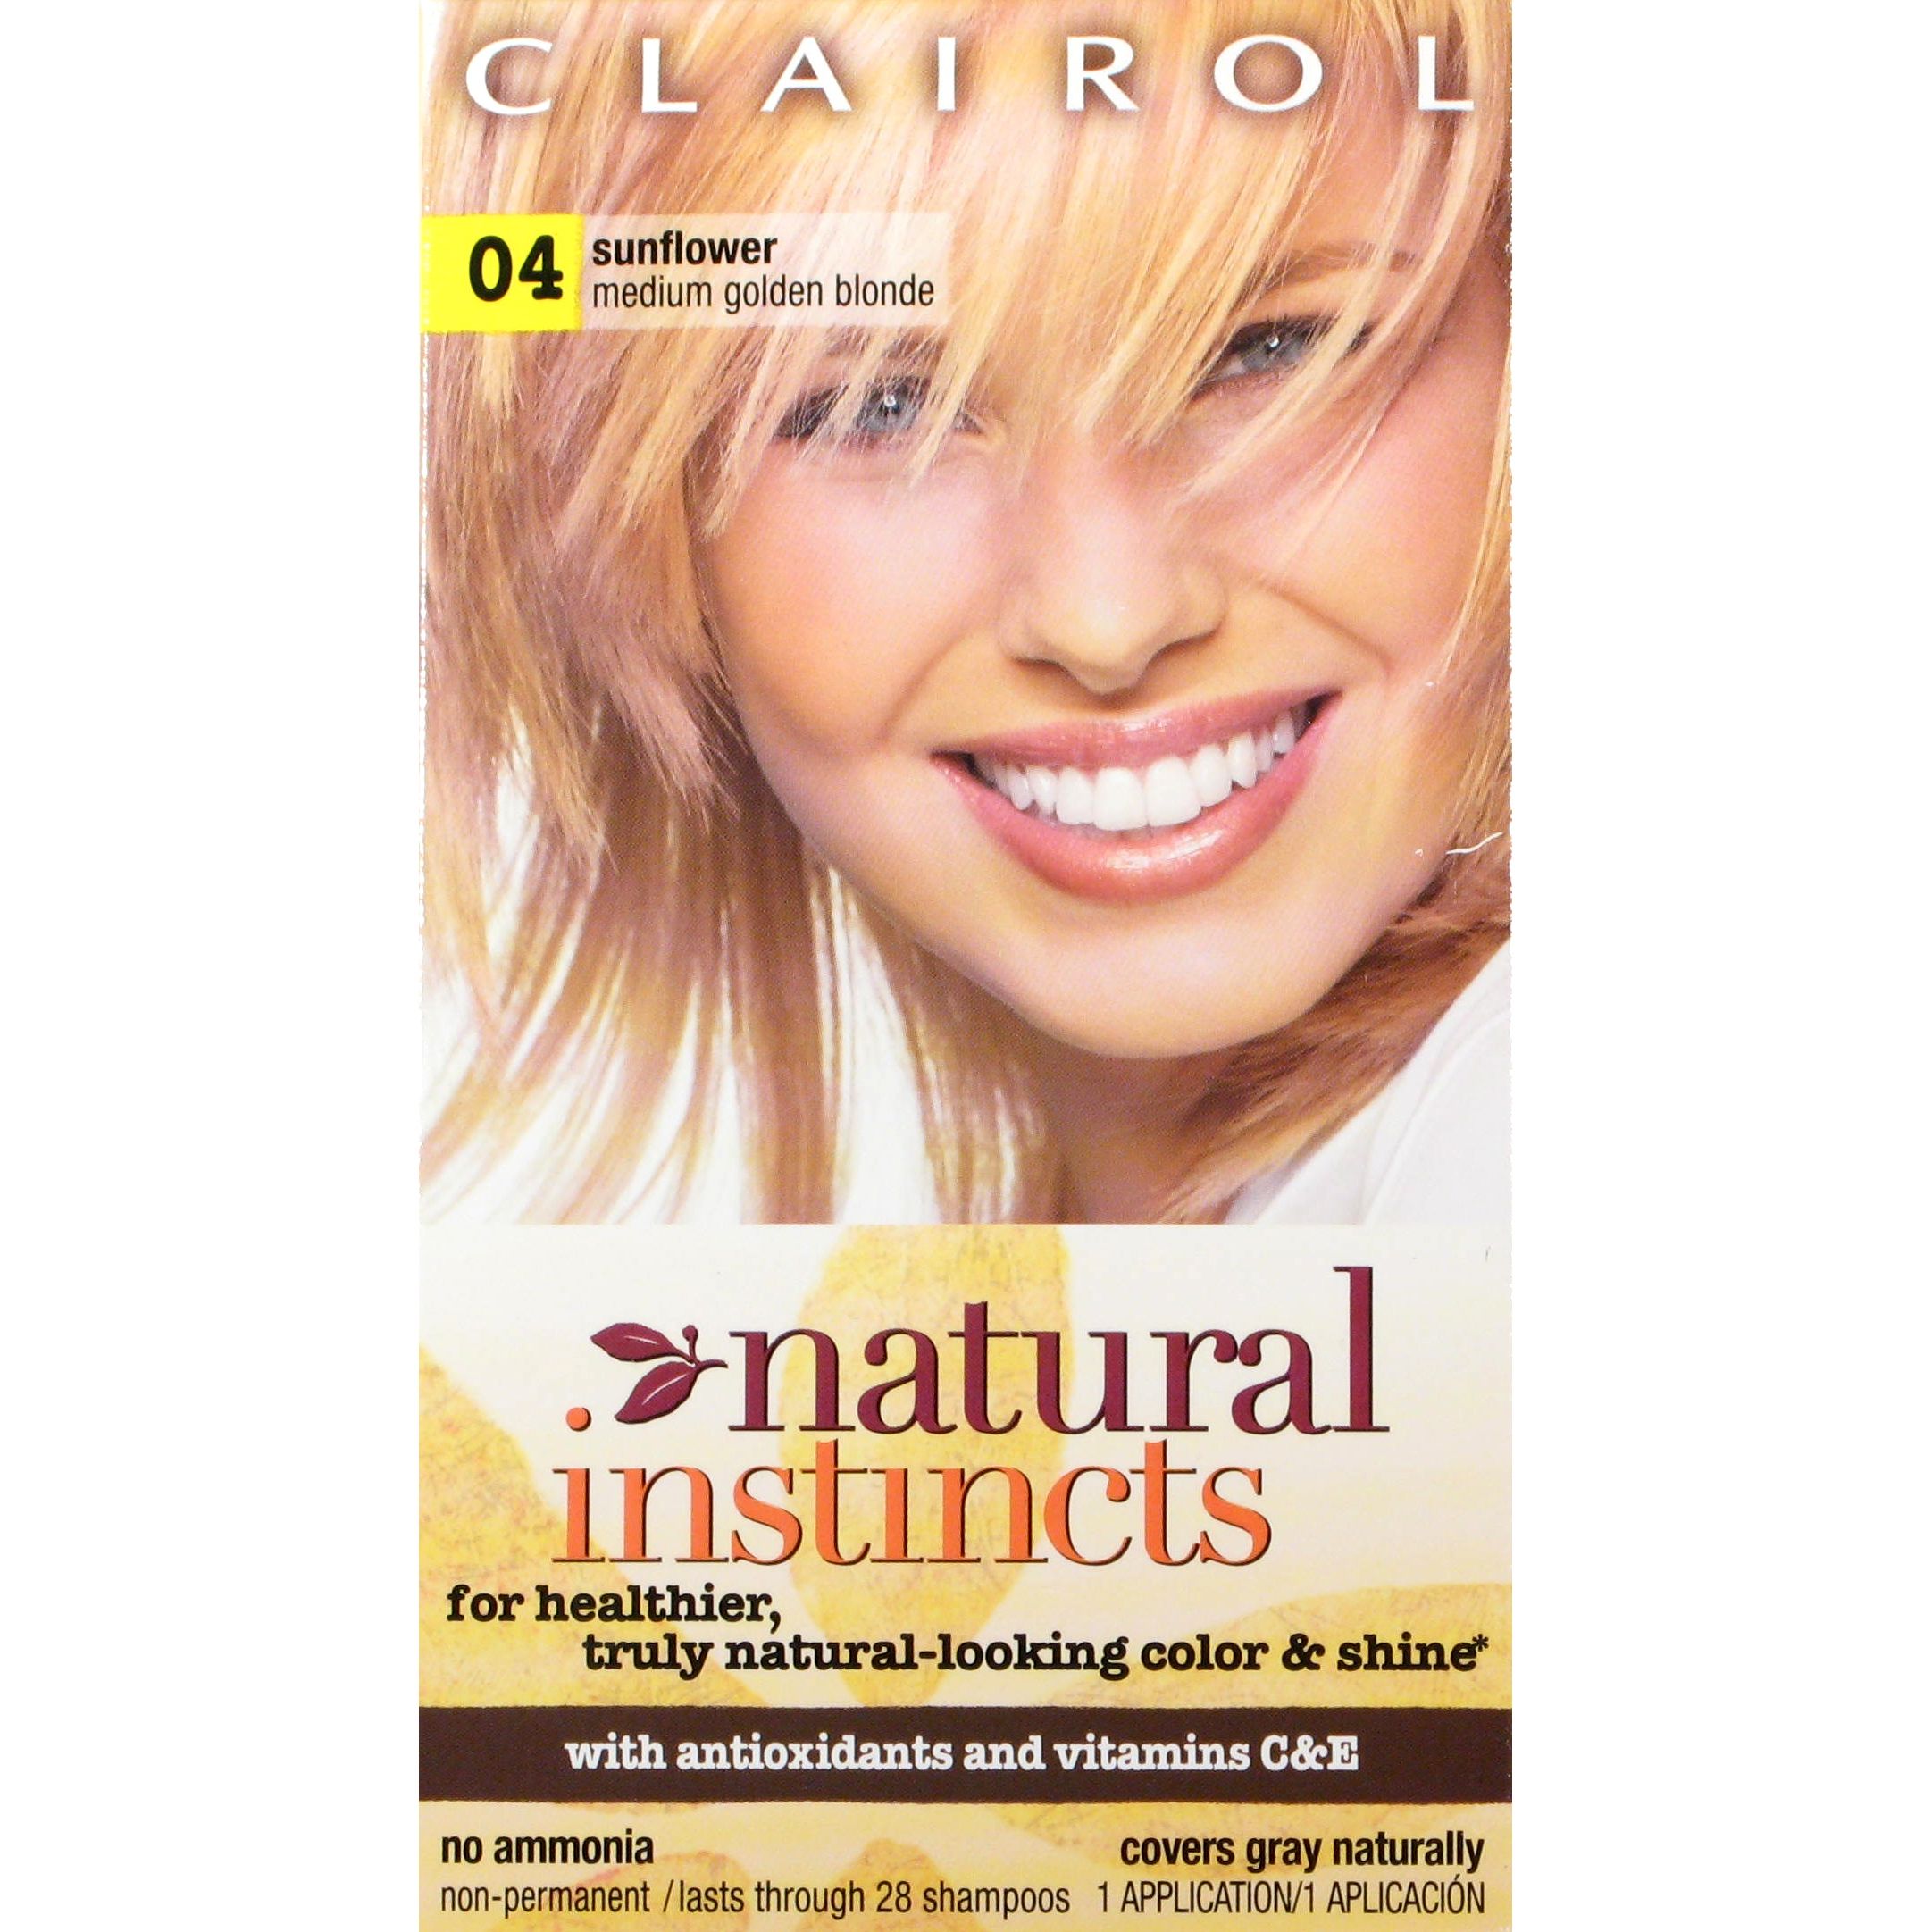 Natural Instincts With Antioxidants and Vitamins C and E Application